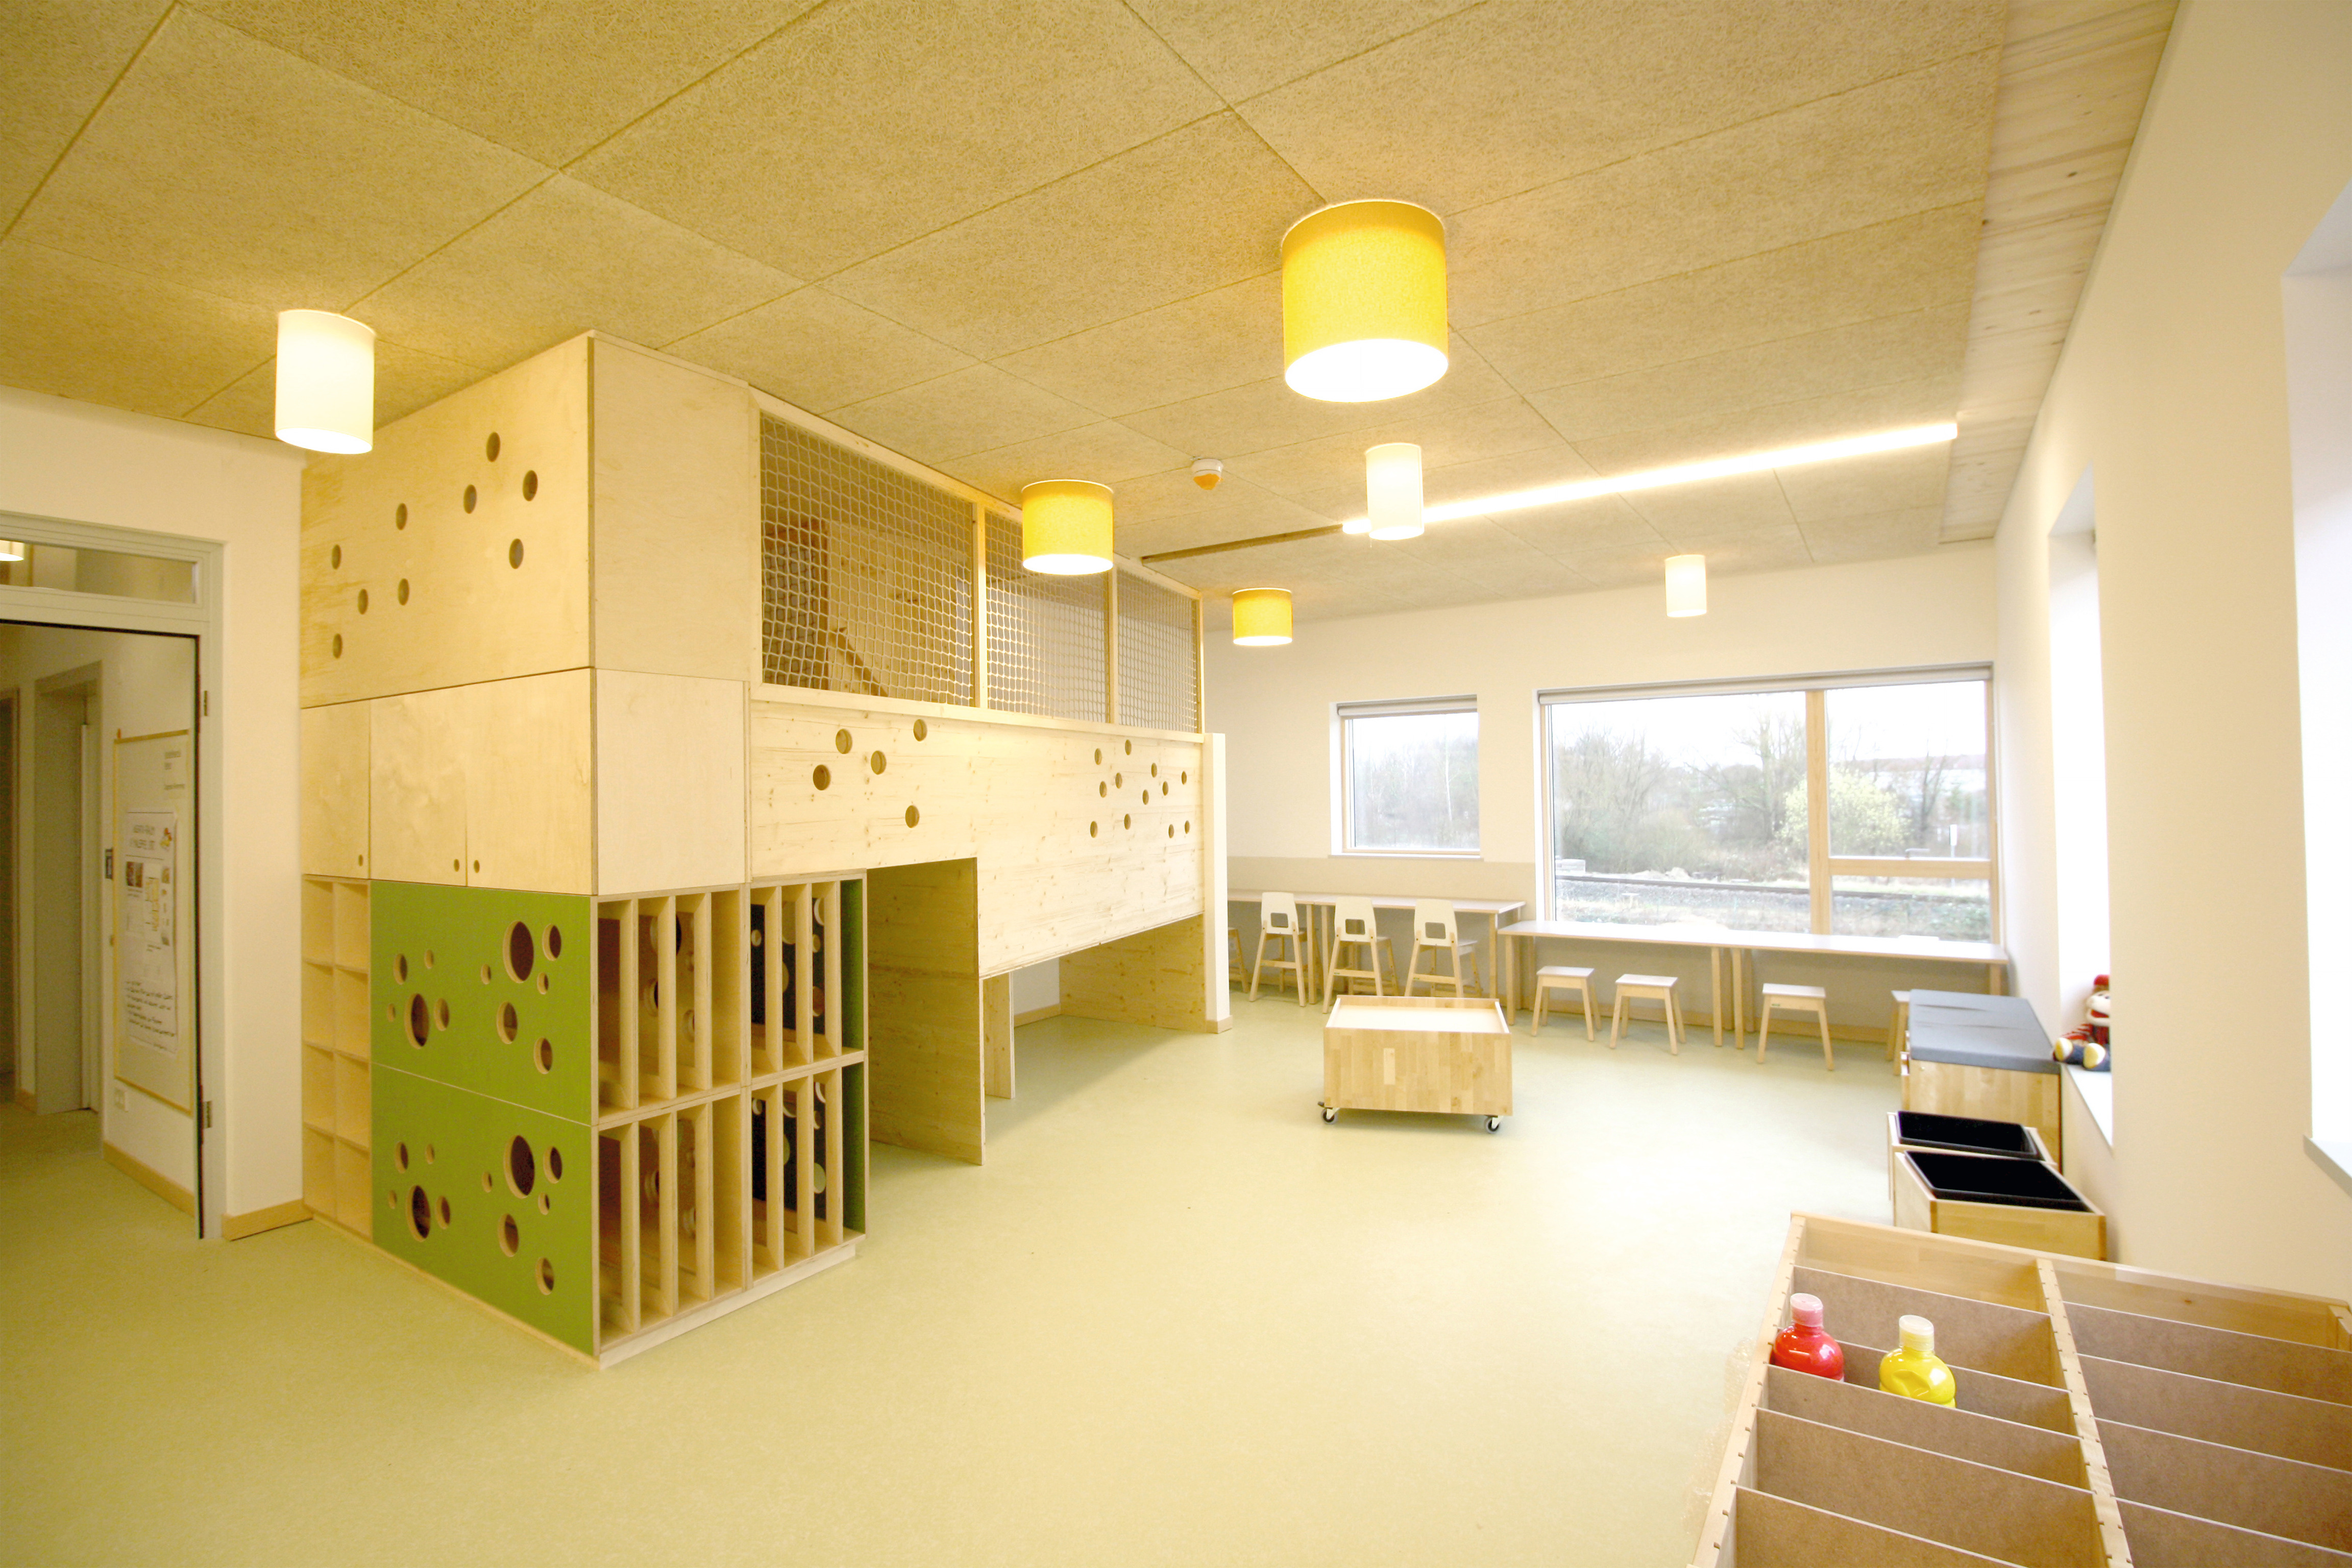 The children of the day care centre in Wismar take much pleasure in the new building.